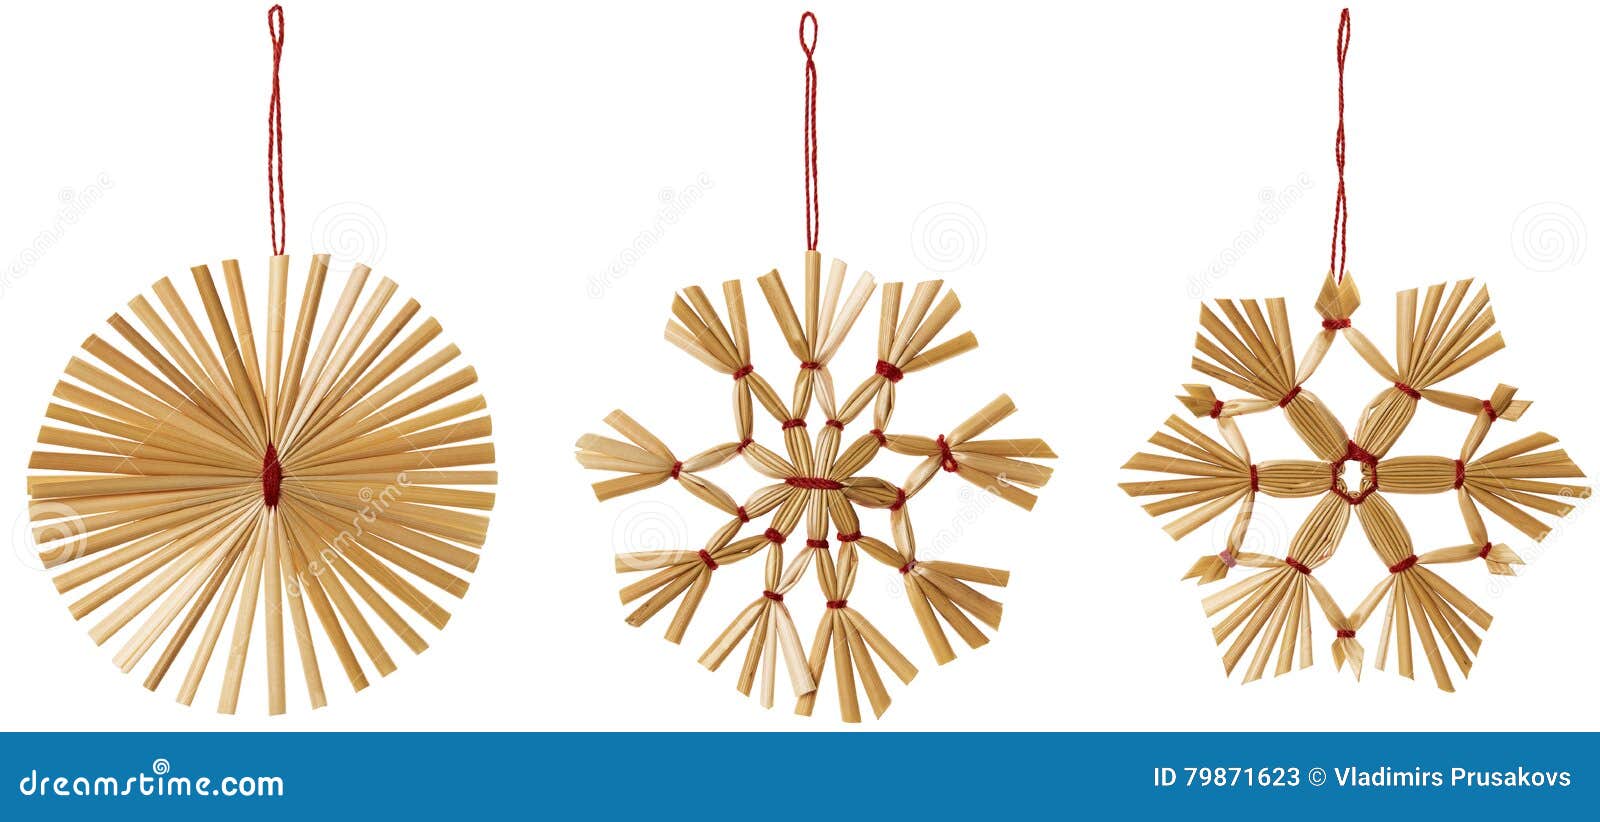 https://thumbs.dreamstime.com/z/straw-snowflake-hanging-decoration-strawy-snow-flake-christmas-hang-toy-set-white-isolated-79871623.jpg